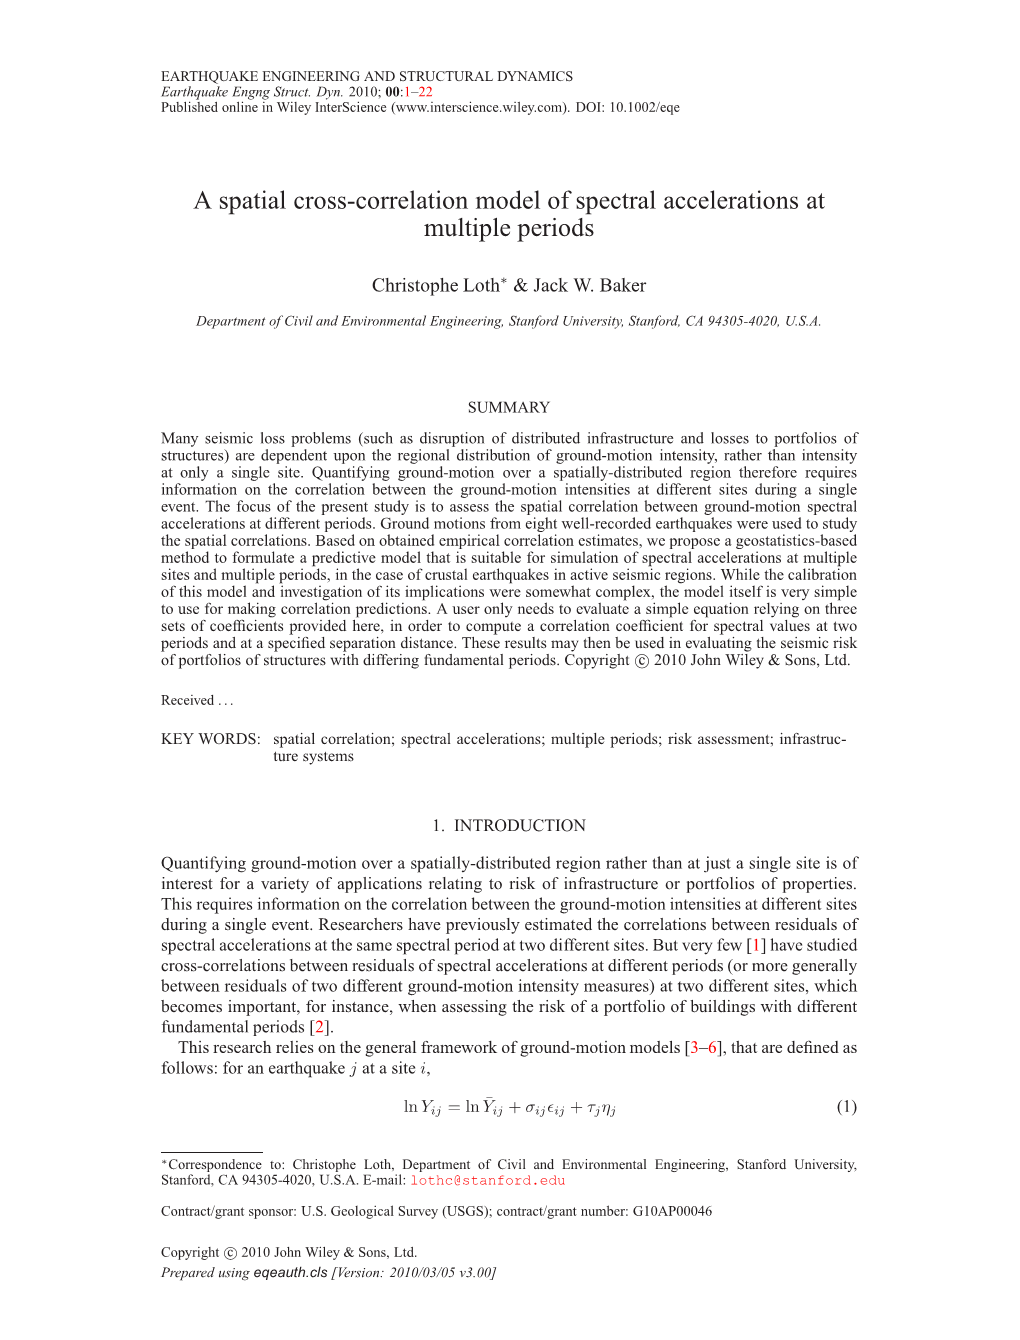 A Spatial Cross-Correlation Model of Spectral Accelerations at Multiple Periods